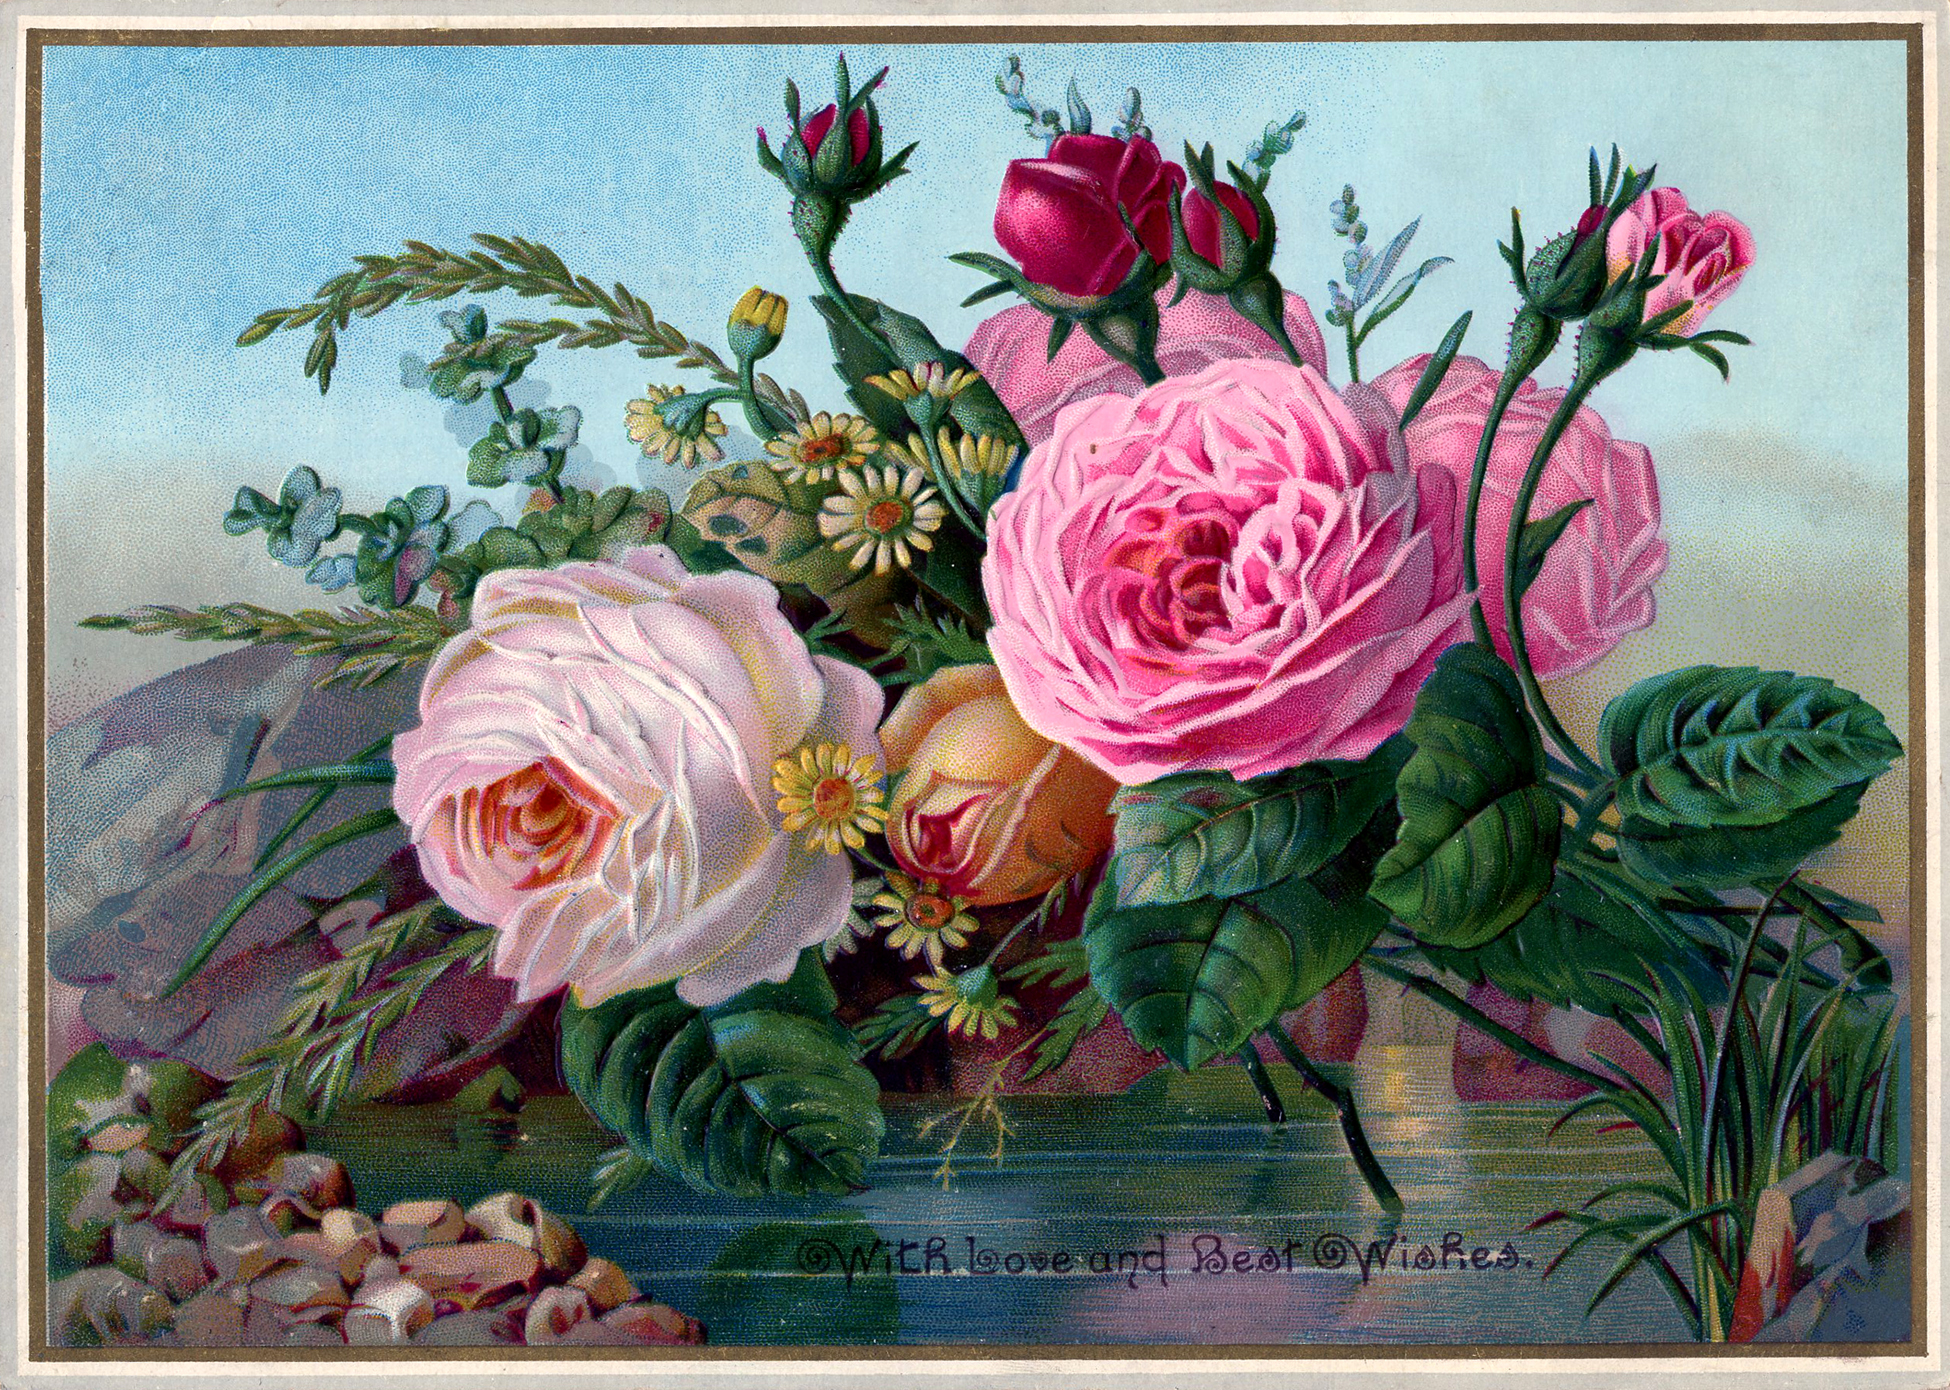 free-download-free-public-domain-vintage-image-stunning-roses-the